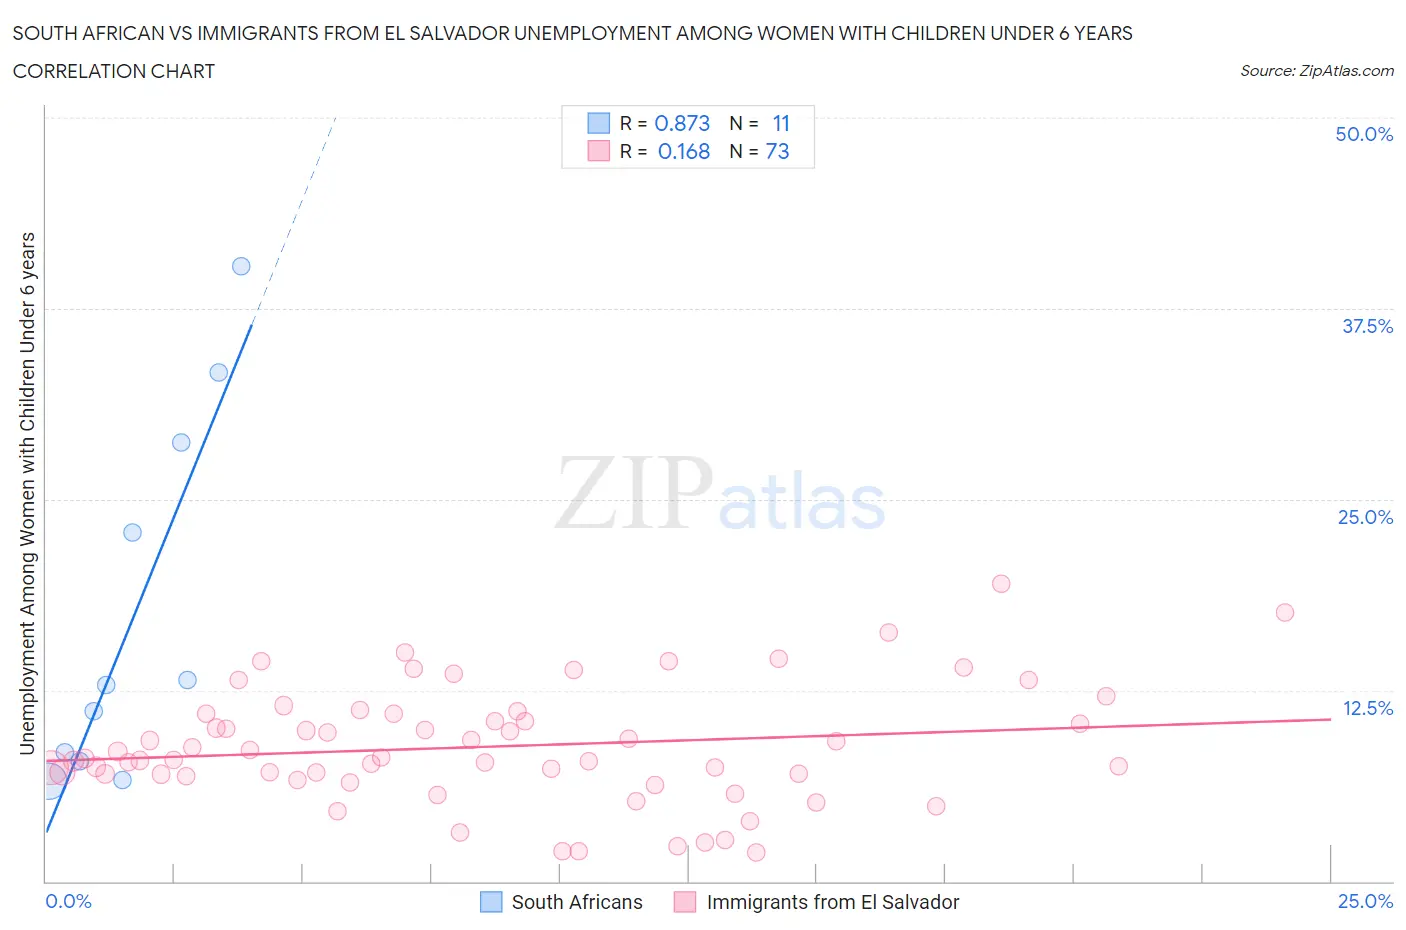 South African vs Immigrants from El Salvador Unemployment Among Women with Children Under 6 years